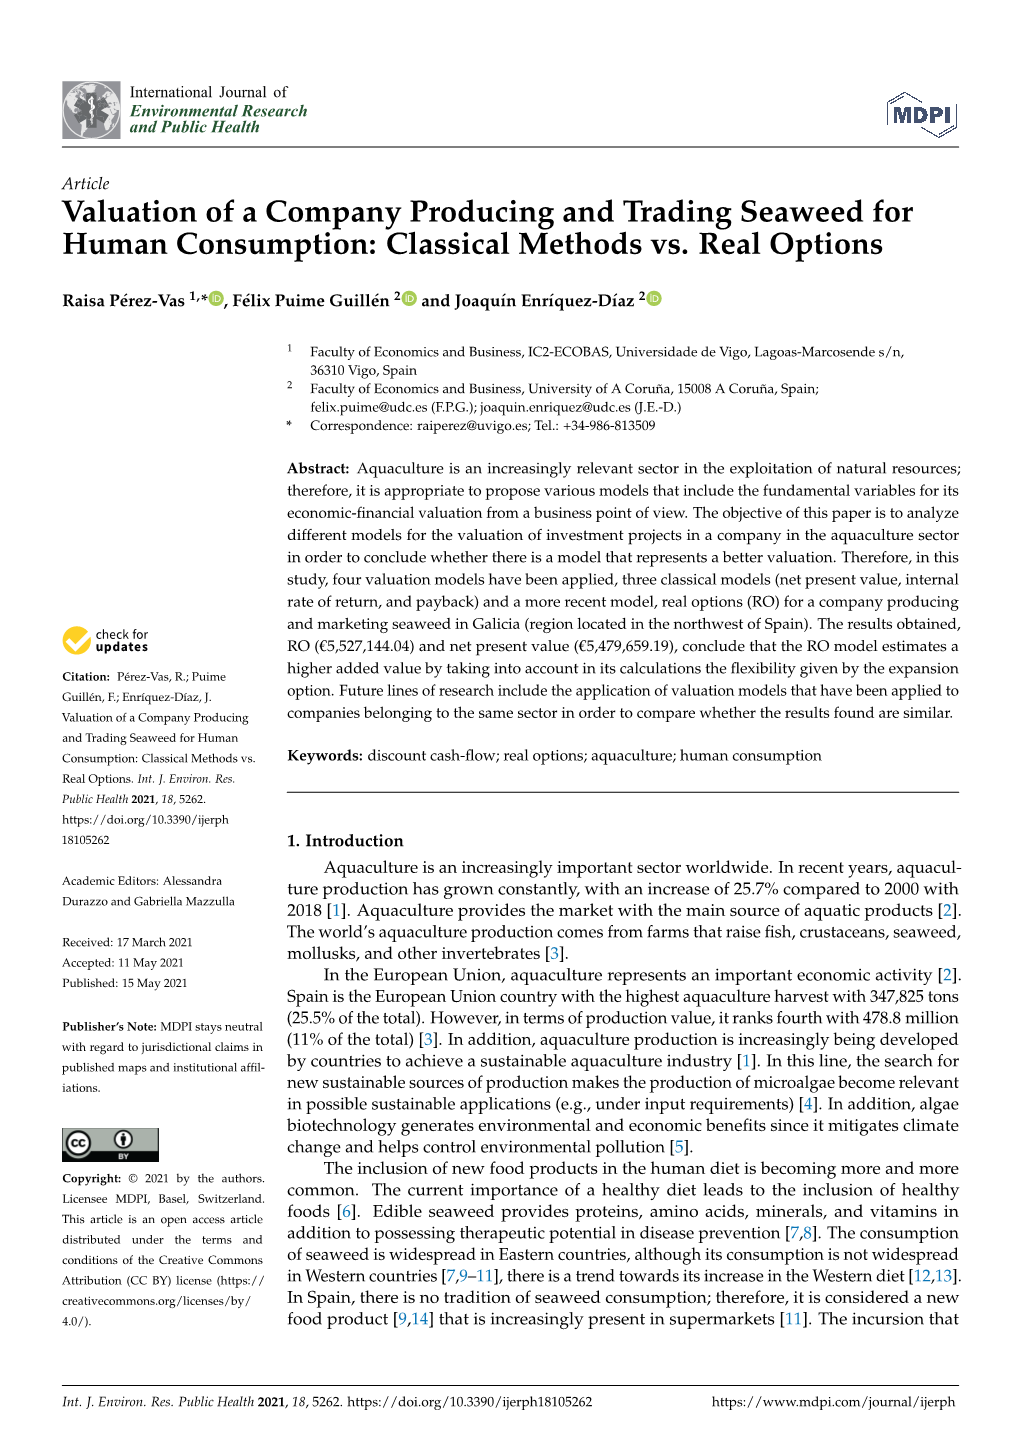 Valuation of a Company Producing and Trading Seaweed for Human Consumption: Classical Methods Vs